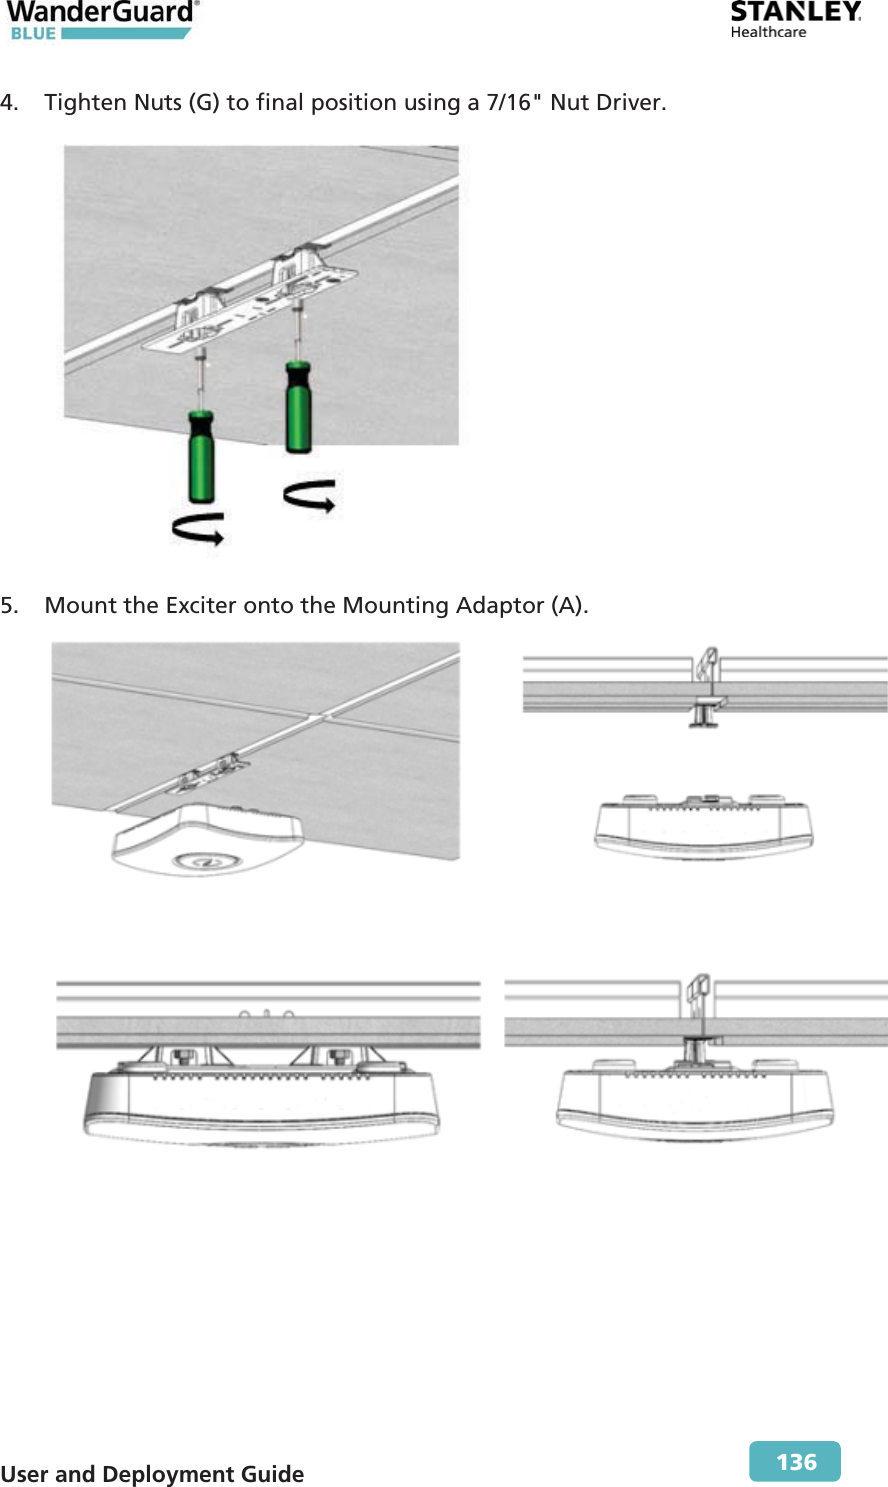  User and Deployment Guide        136 4. Tighten Nuts (G) to final position using a 7/16&quot; Nut Driver.  5. Mount the Exciter onto the Mounting Adaptor (A).   